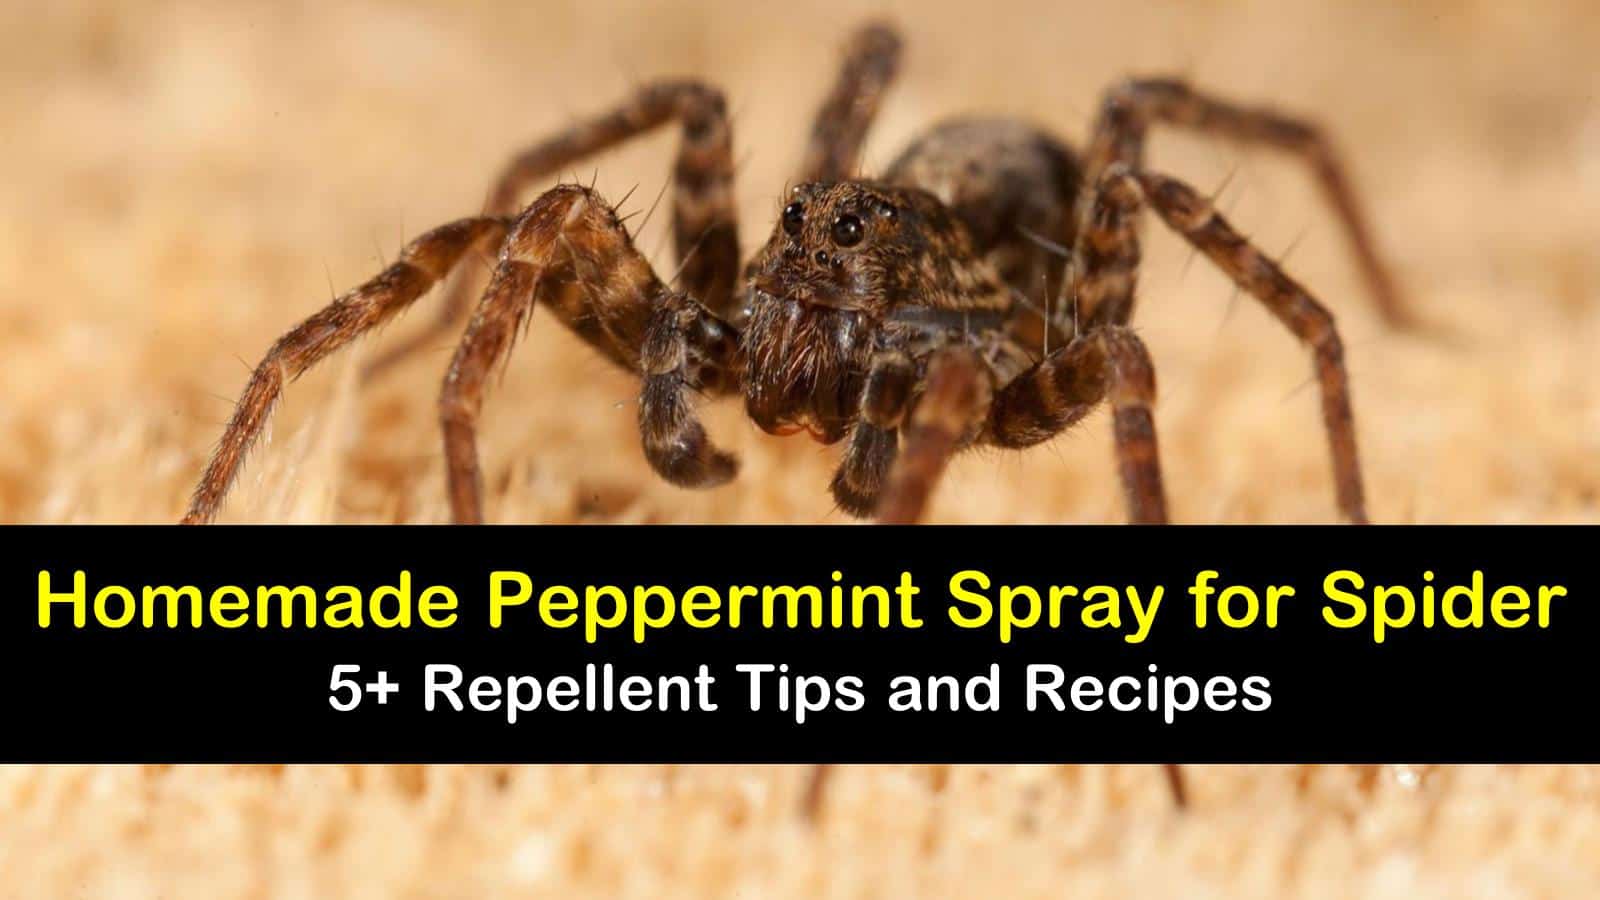 peppermint spray for spiders titleimg1